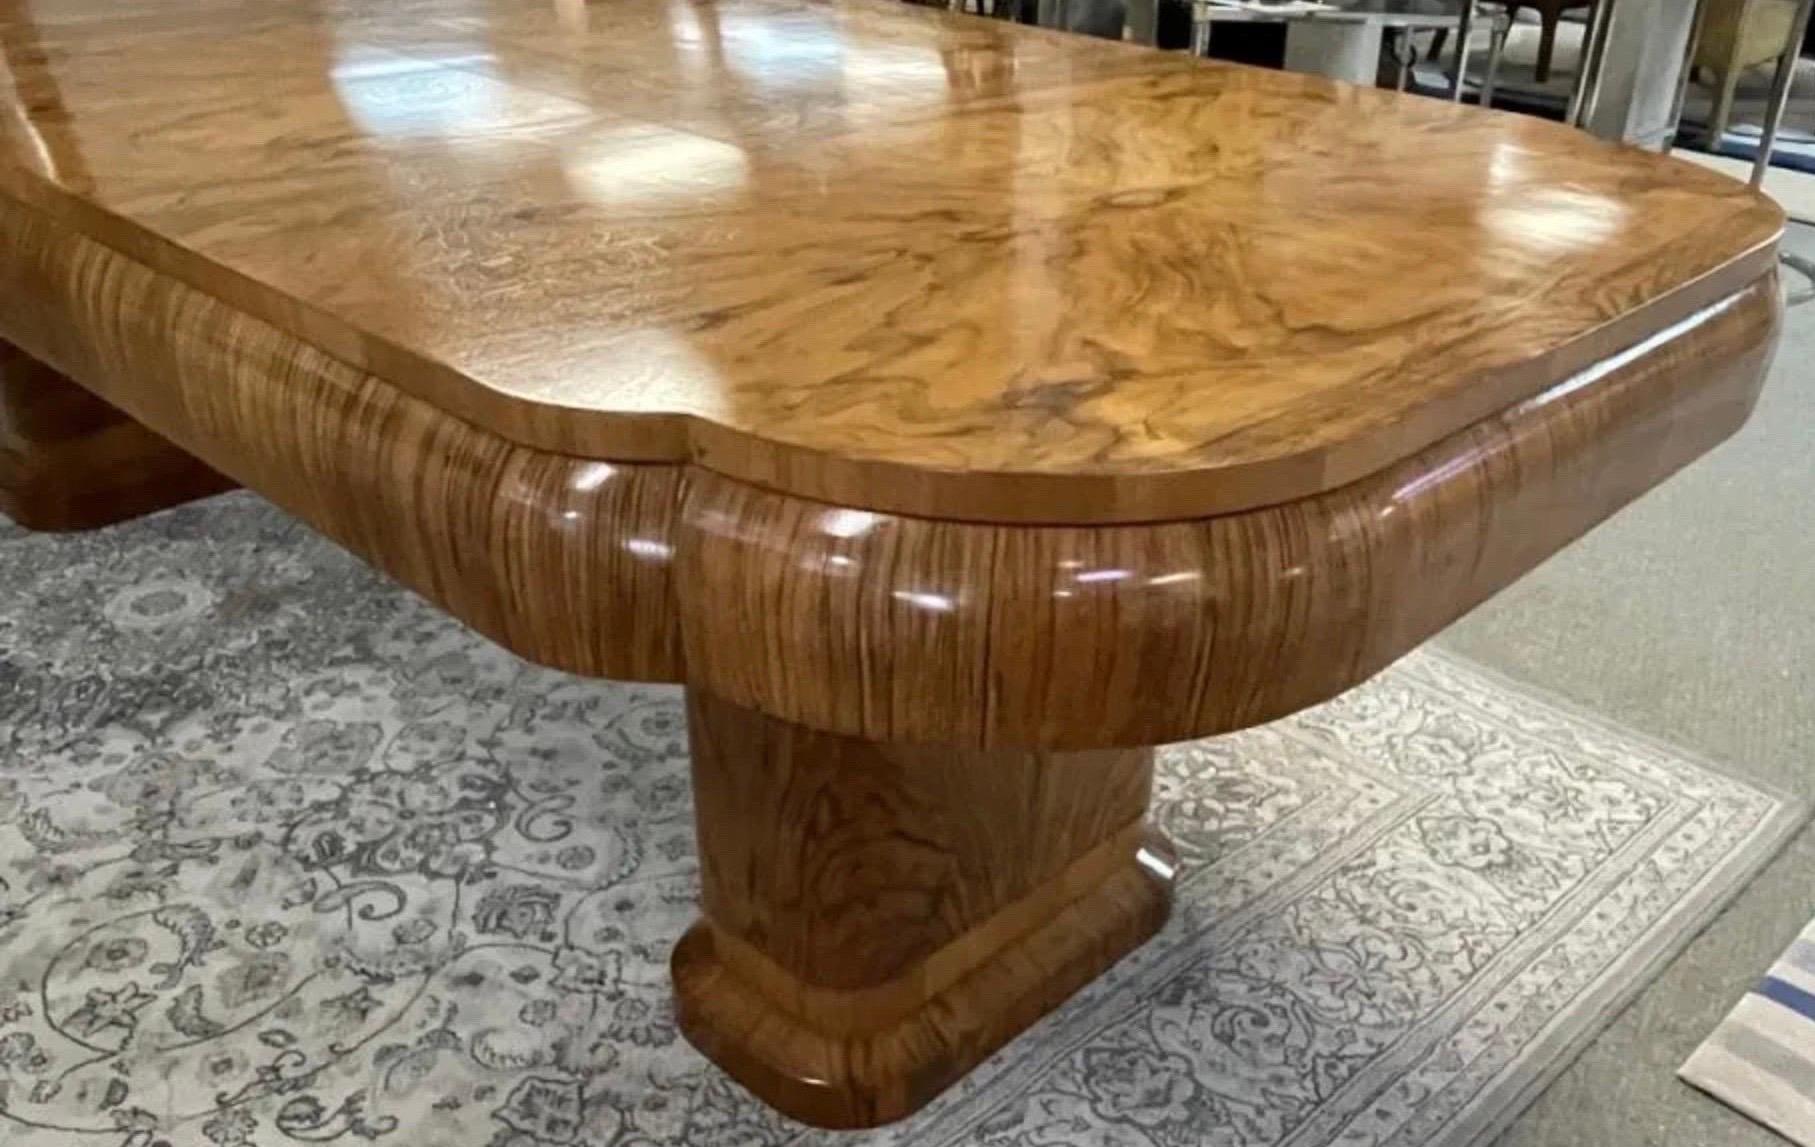 Vintage large Art Deco Burlwood table, can also be used as a conference table or a desk.